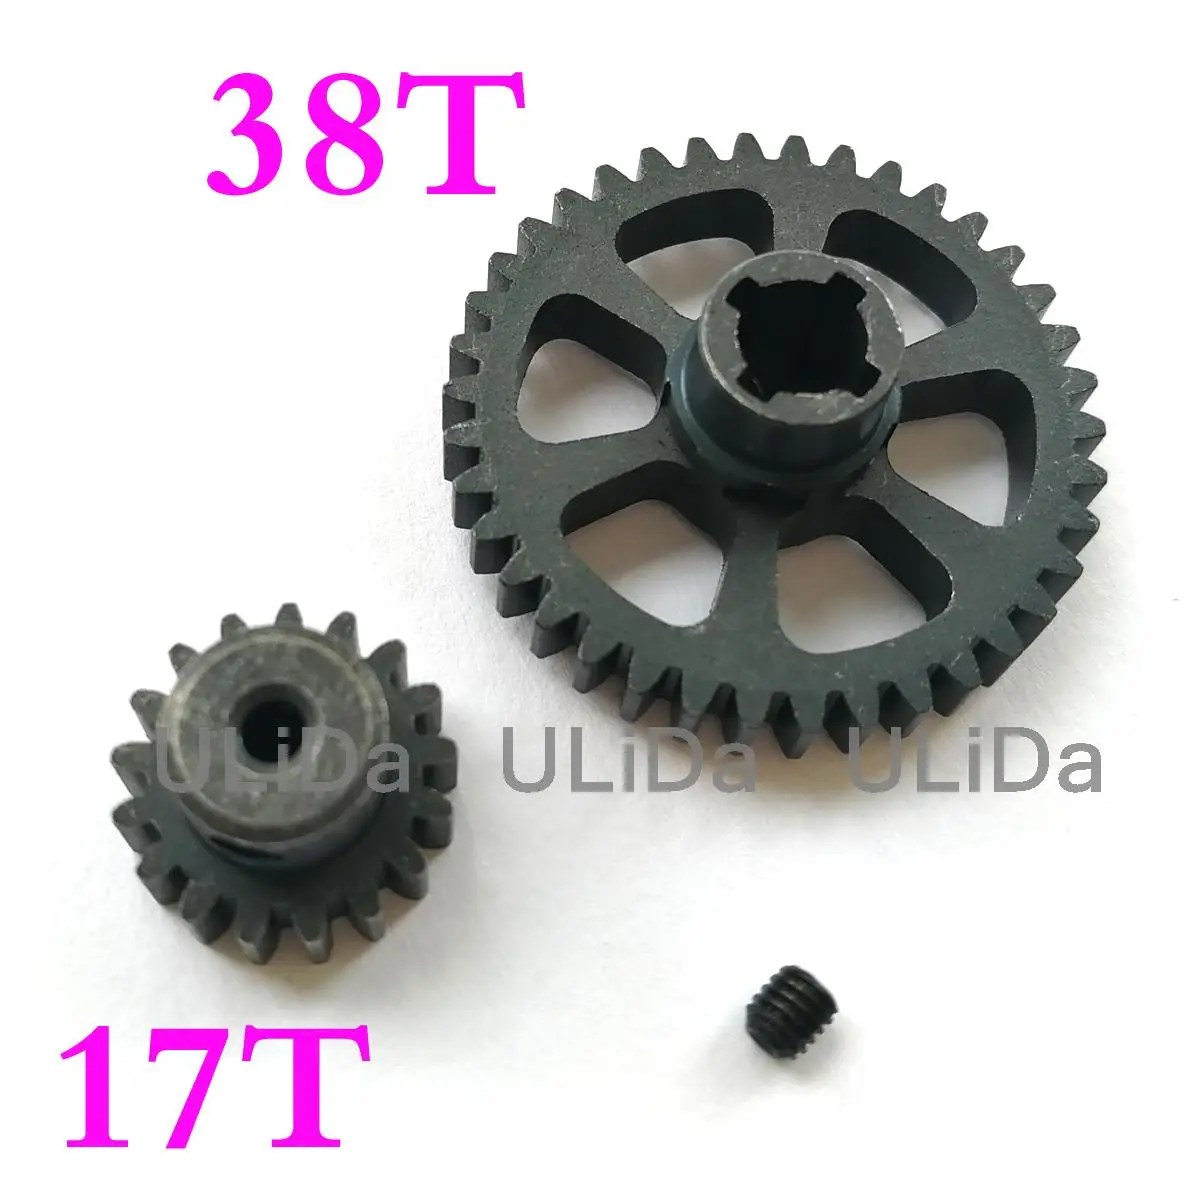 

Metal Diff Main Gear 38T Motor Pinion Gear 17T For 1/18 WLtoys A949 A959 A969 A979 K929 Short Course Truck Upgrade Parts